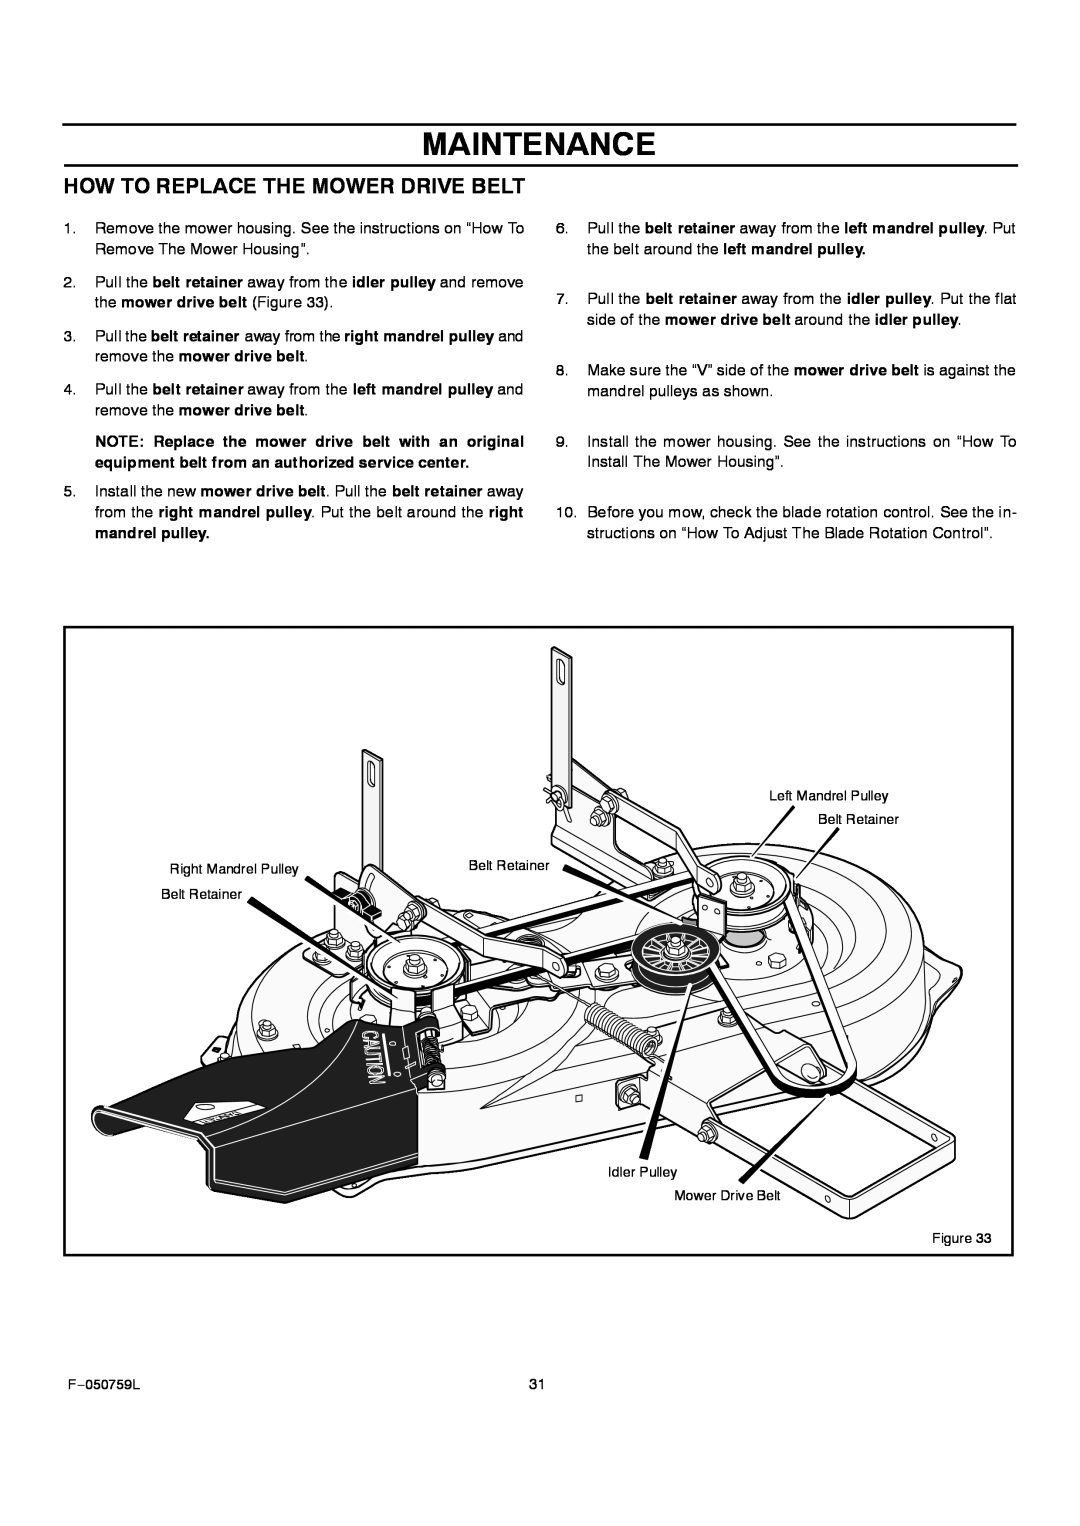 Rover 405012x108A owner manual How To Replace The Mower Drive Belt, Maintenance 